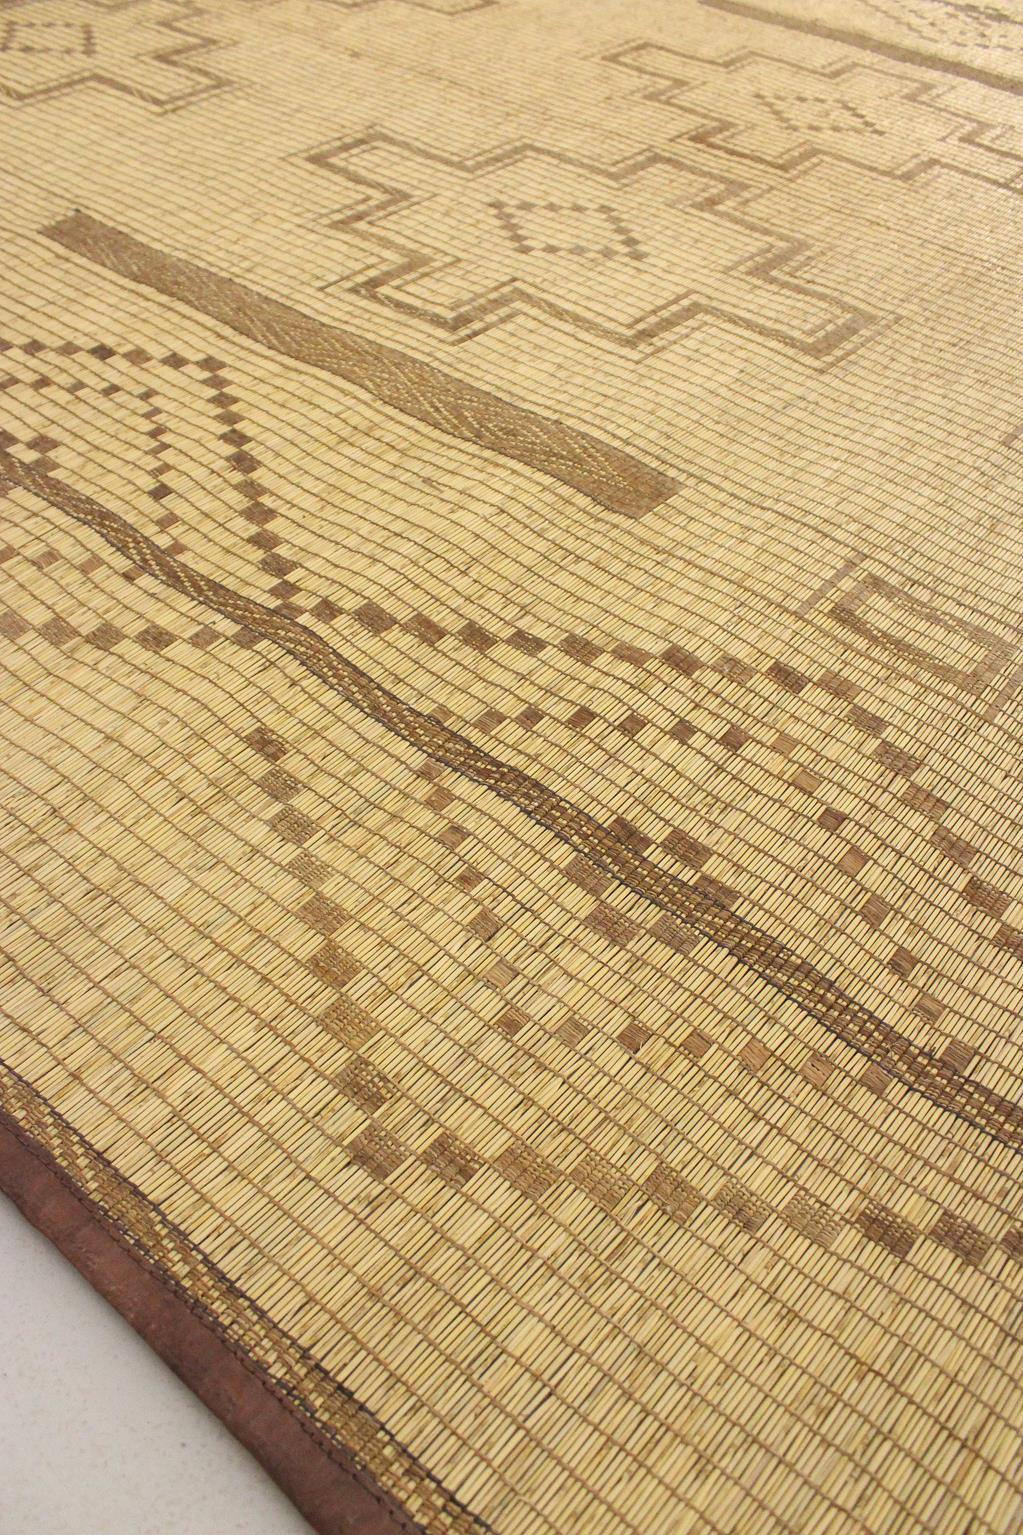 Hand-Knotted Vintage African Mauritanian Tuareg mat in camel - 9.7x14feet / 297x425cm